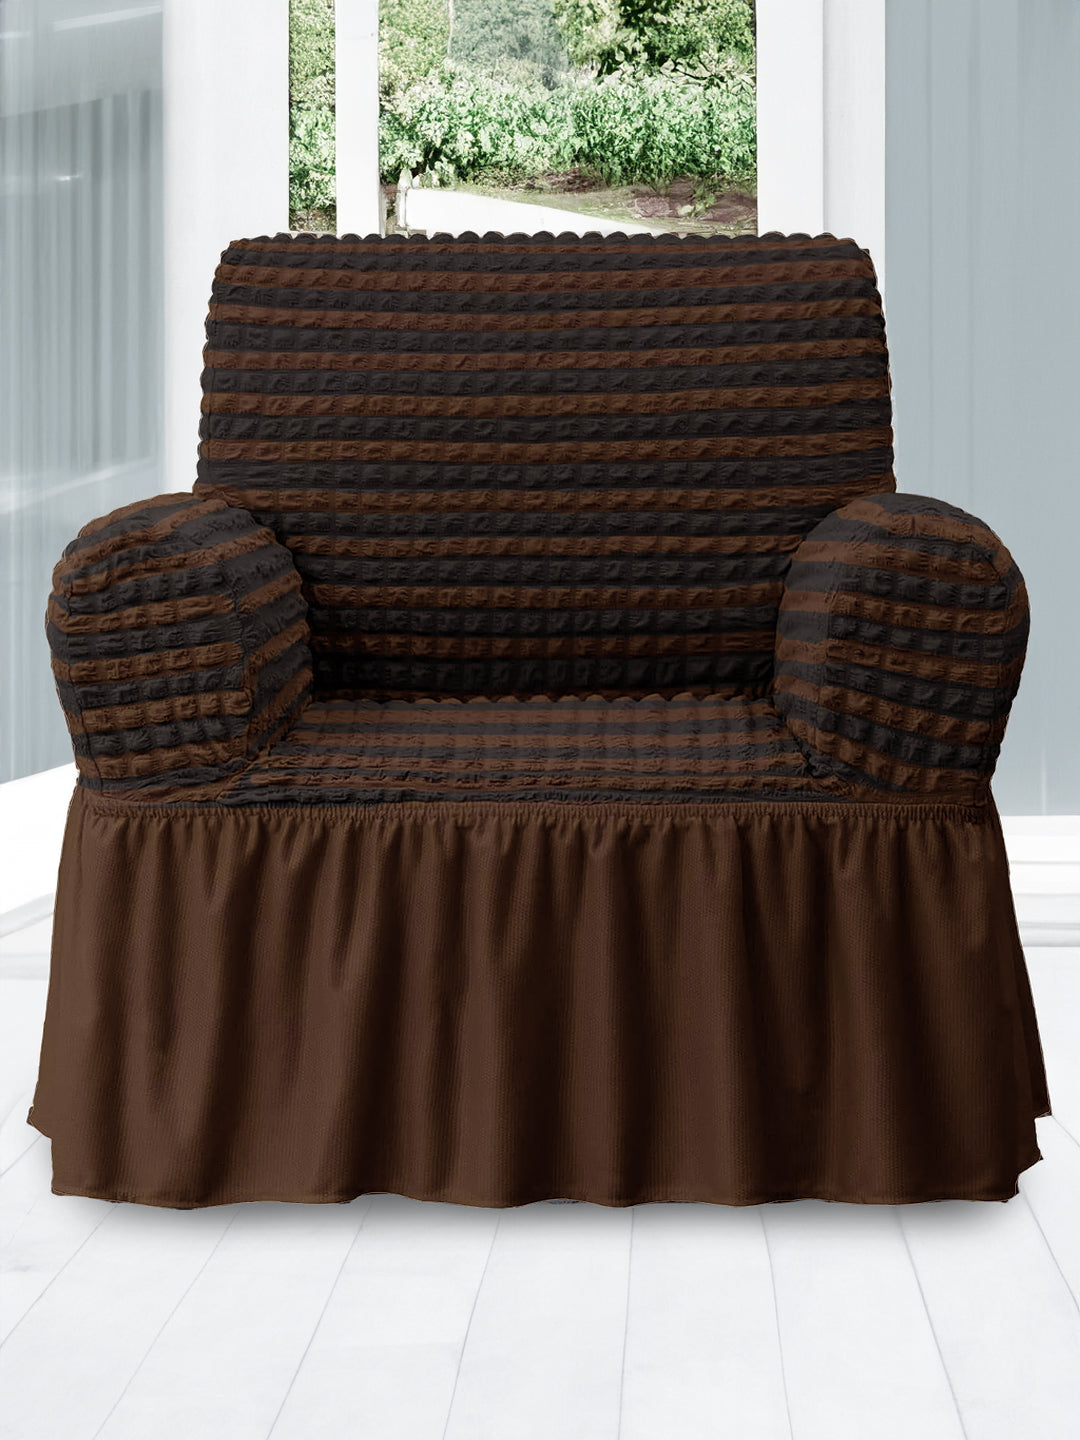 1 Seater Brown